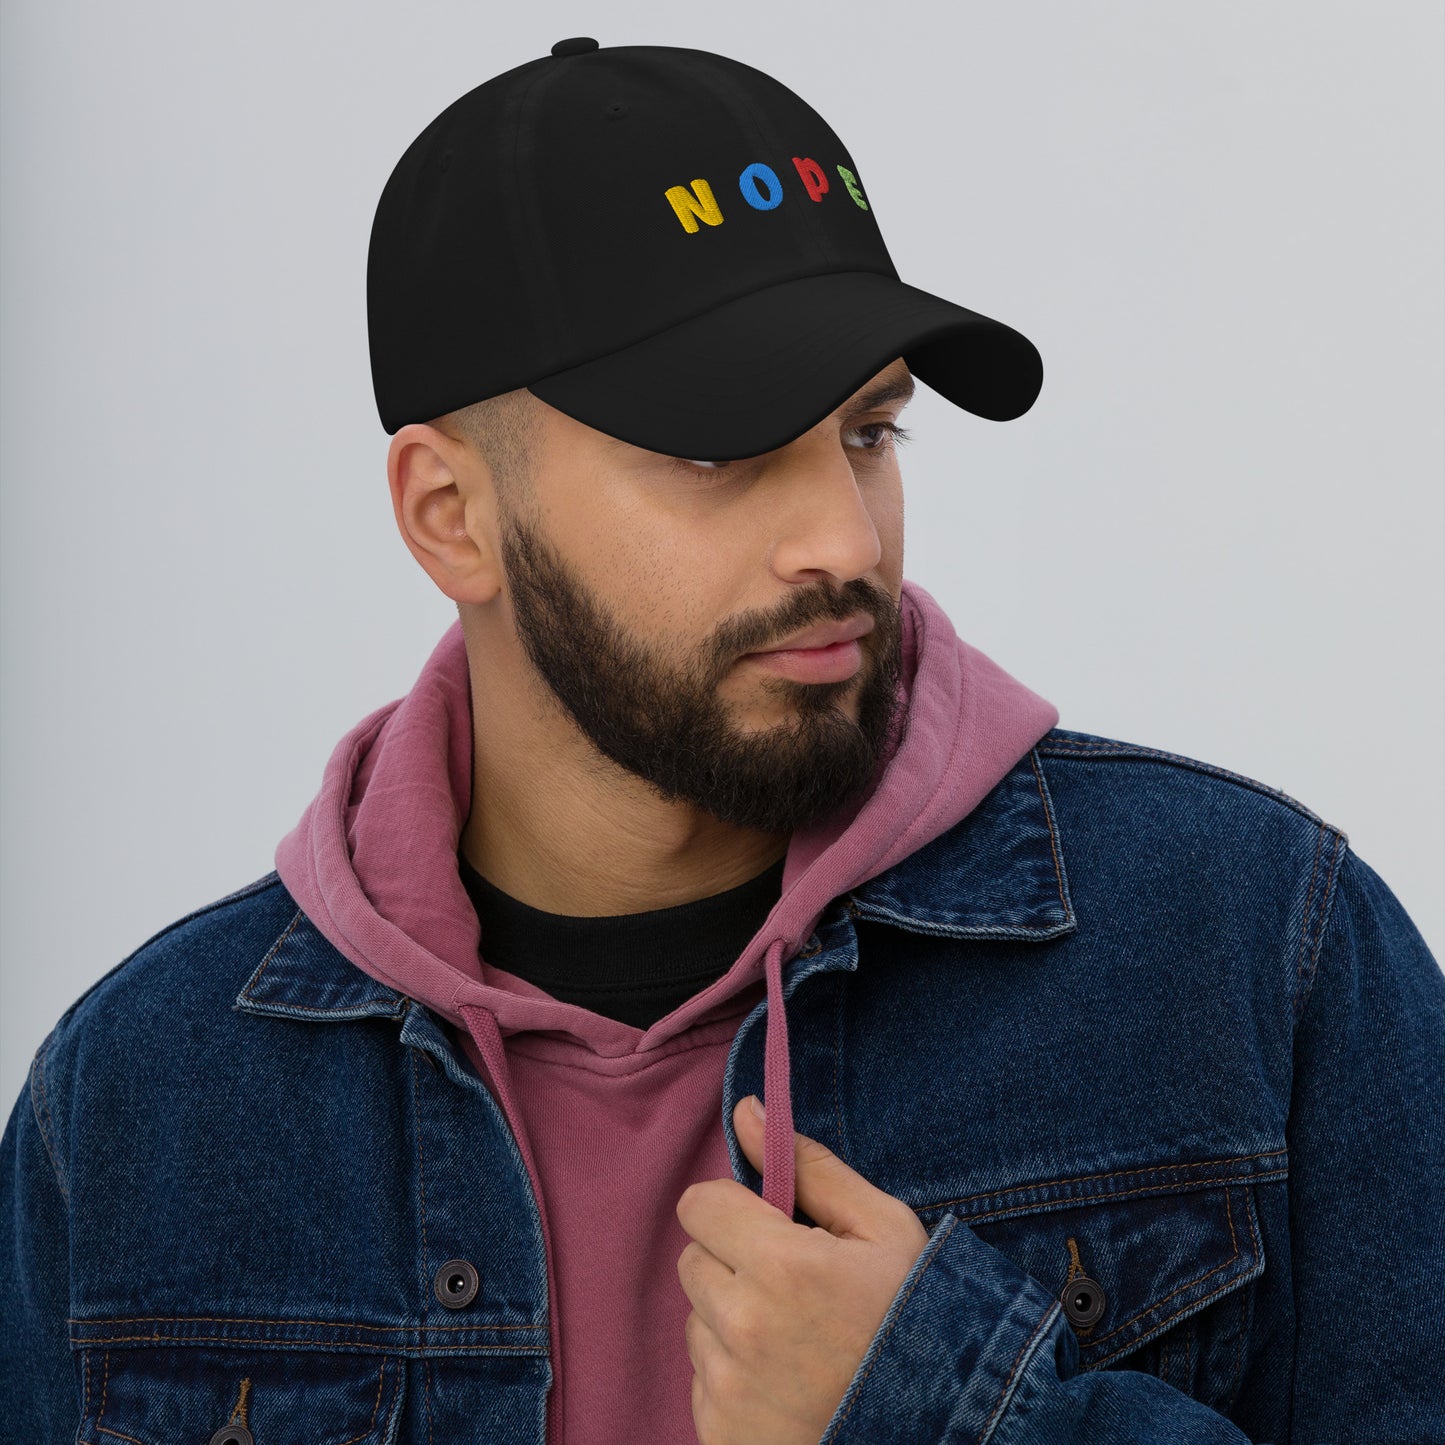 Embroidered Multi-Color "NOPE" Dad Hat - Available in Black, Navy, Pink, and White